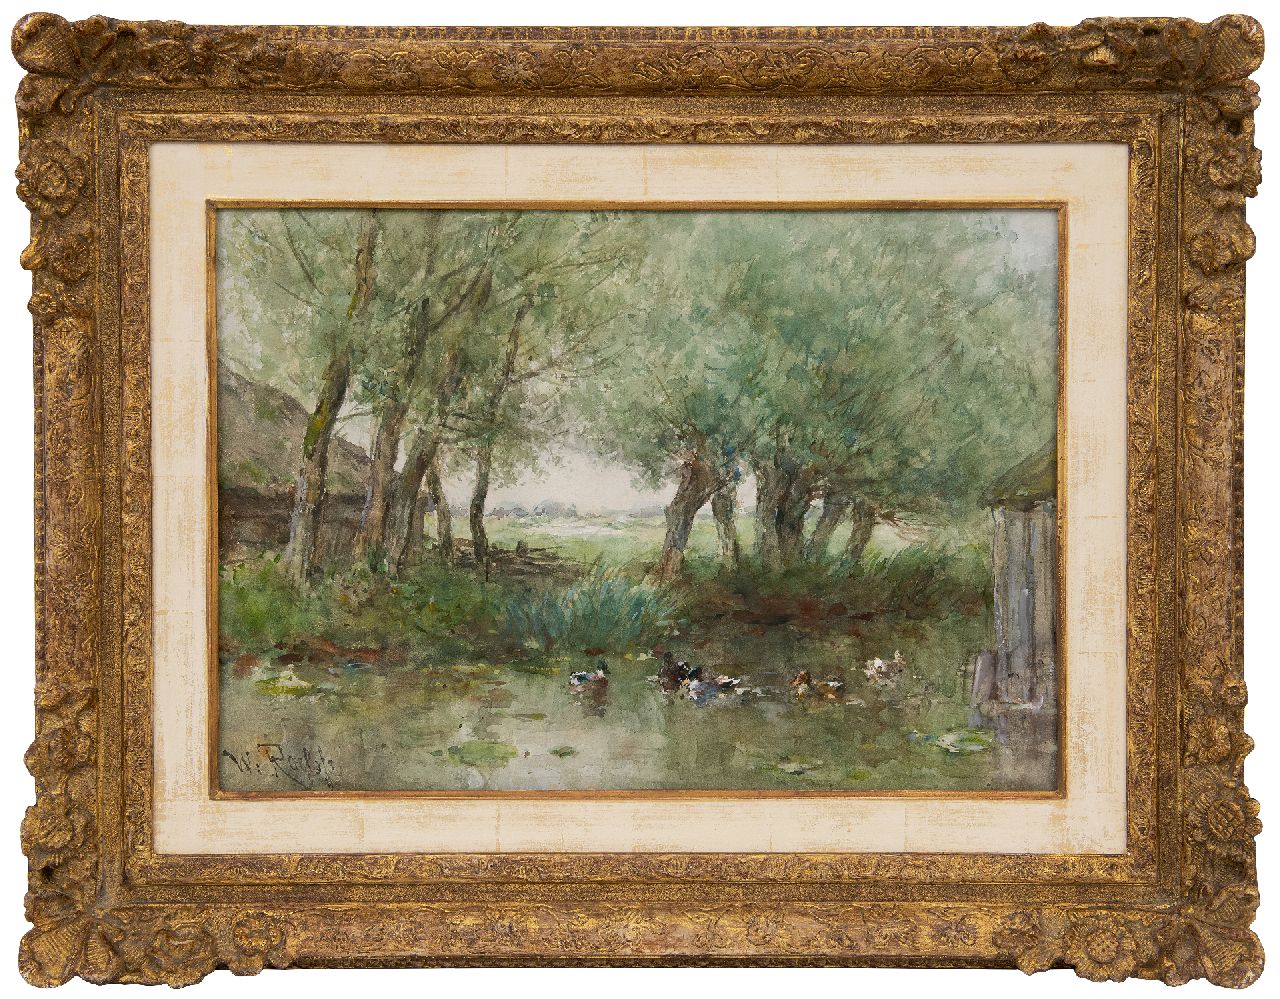 Roelofs W.  | Willem Roelofs, Ducks in the water under willow trees, watercolour on paper 33.7 x 47.9 cm, signed l.l.